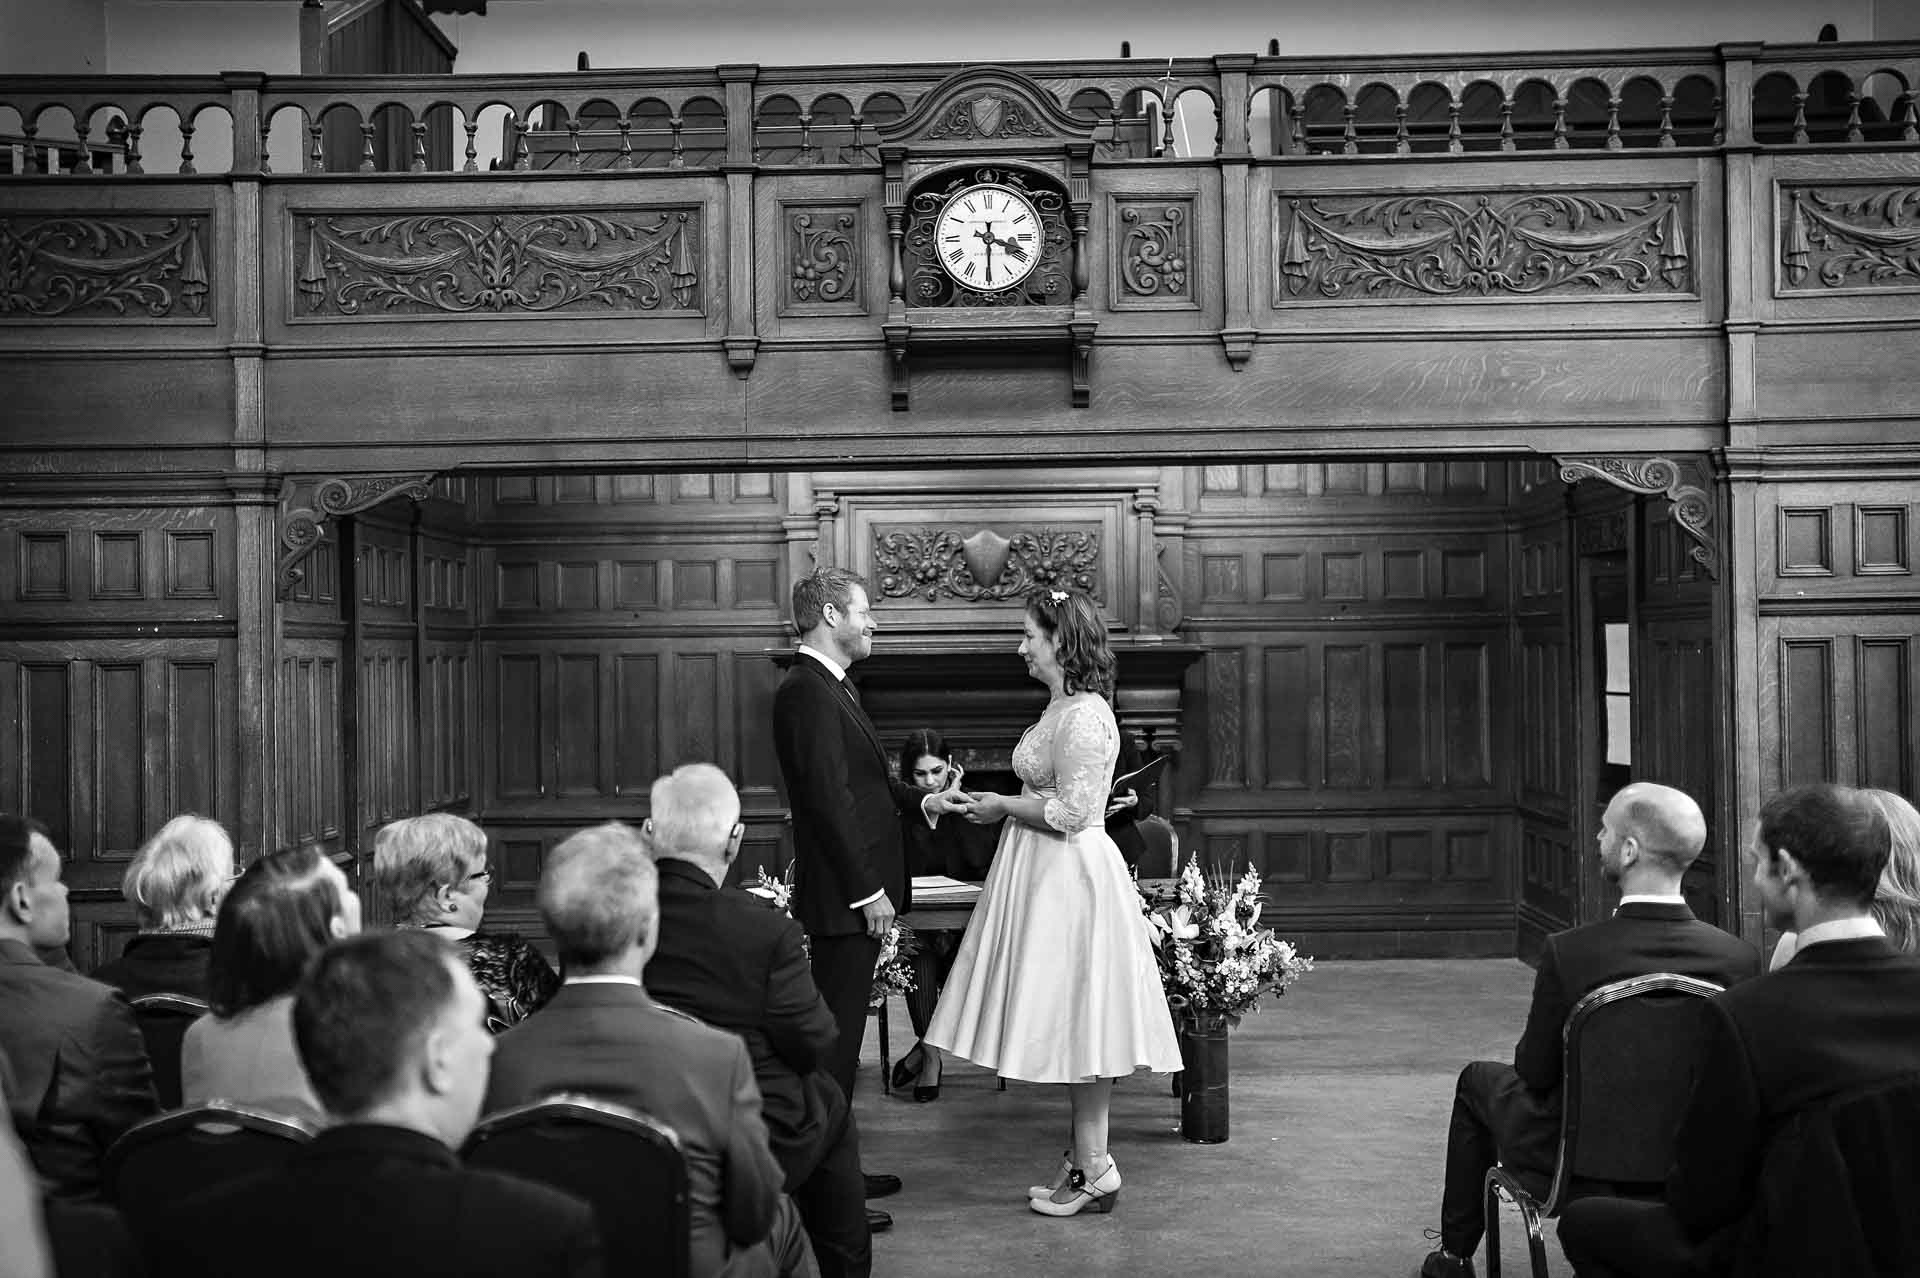 Exchange of Rings at Chiswick Town Hall